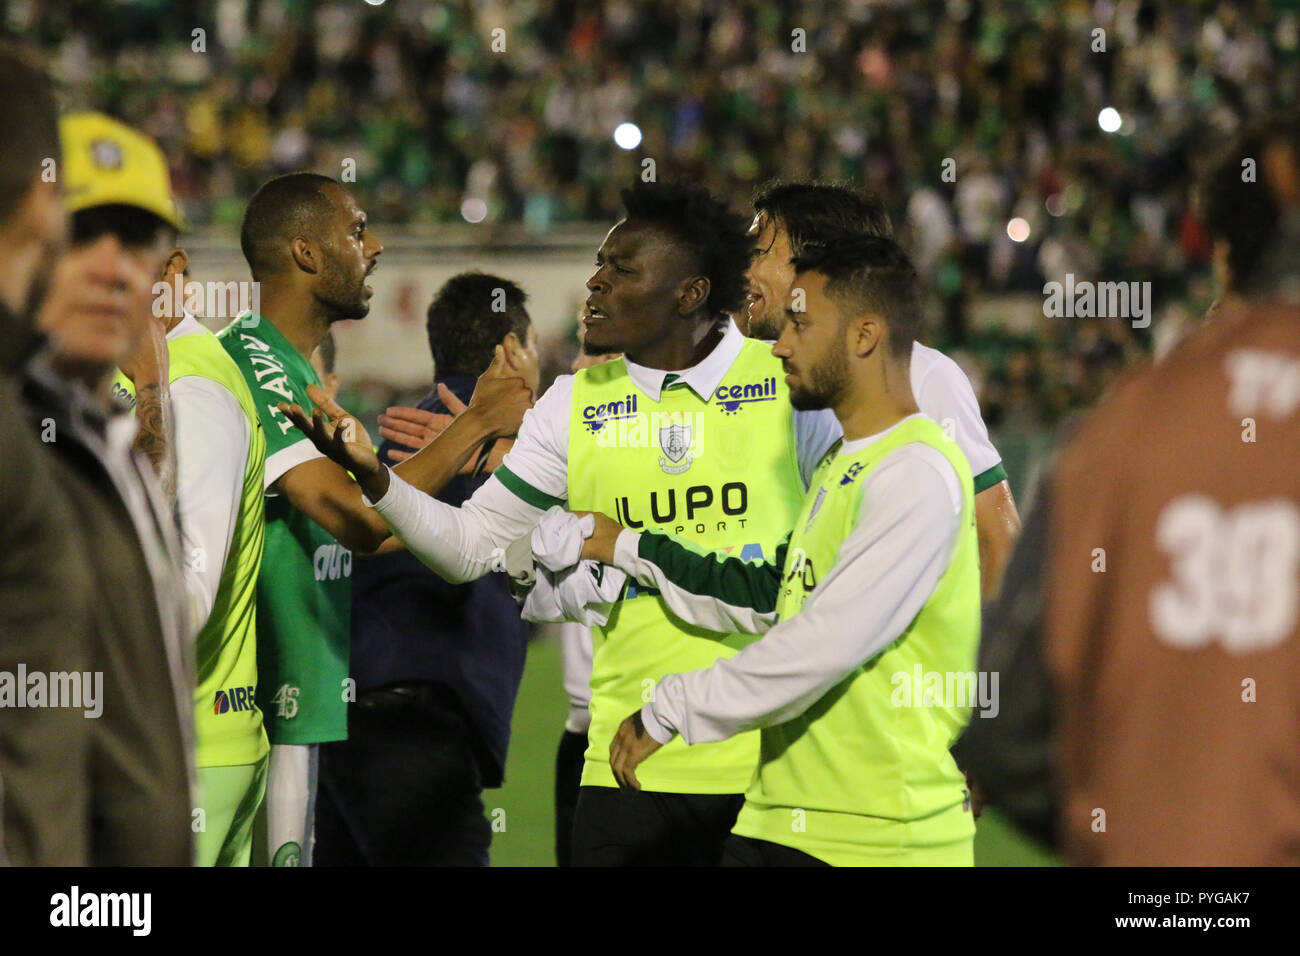 SC - Chapeco - 10/27/2018 - Brazilian A 2018, Chapecoense x Am rica-MG - player of Am rica-MG Paul during the riot at the end of the match against Chapecoense Arena Arena Conda for the Brazilian championship A 2018. Foto : Renato Padilha / AGIF Stock Photo